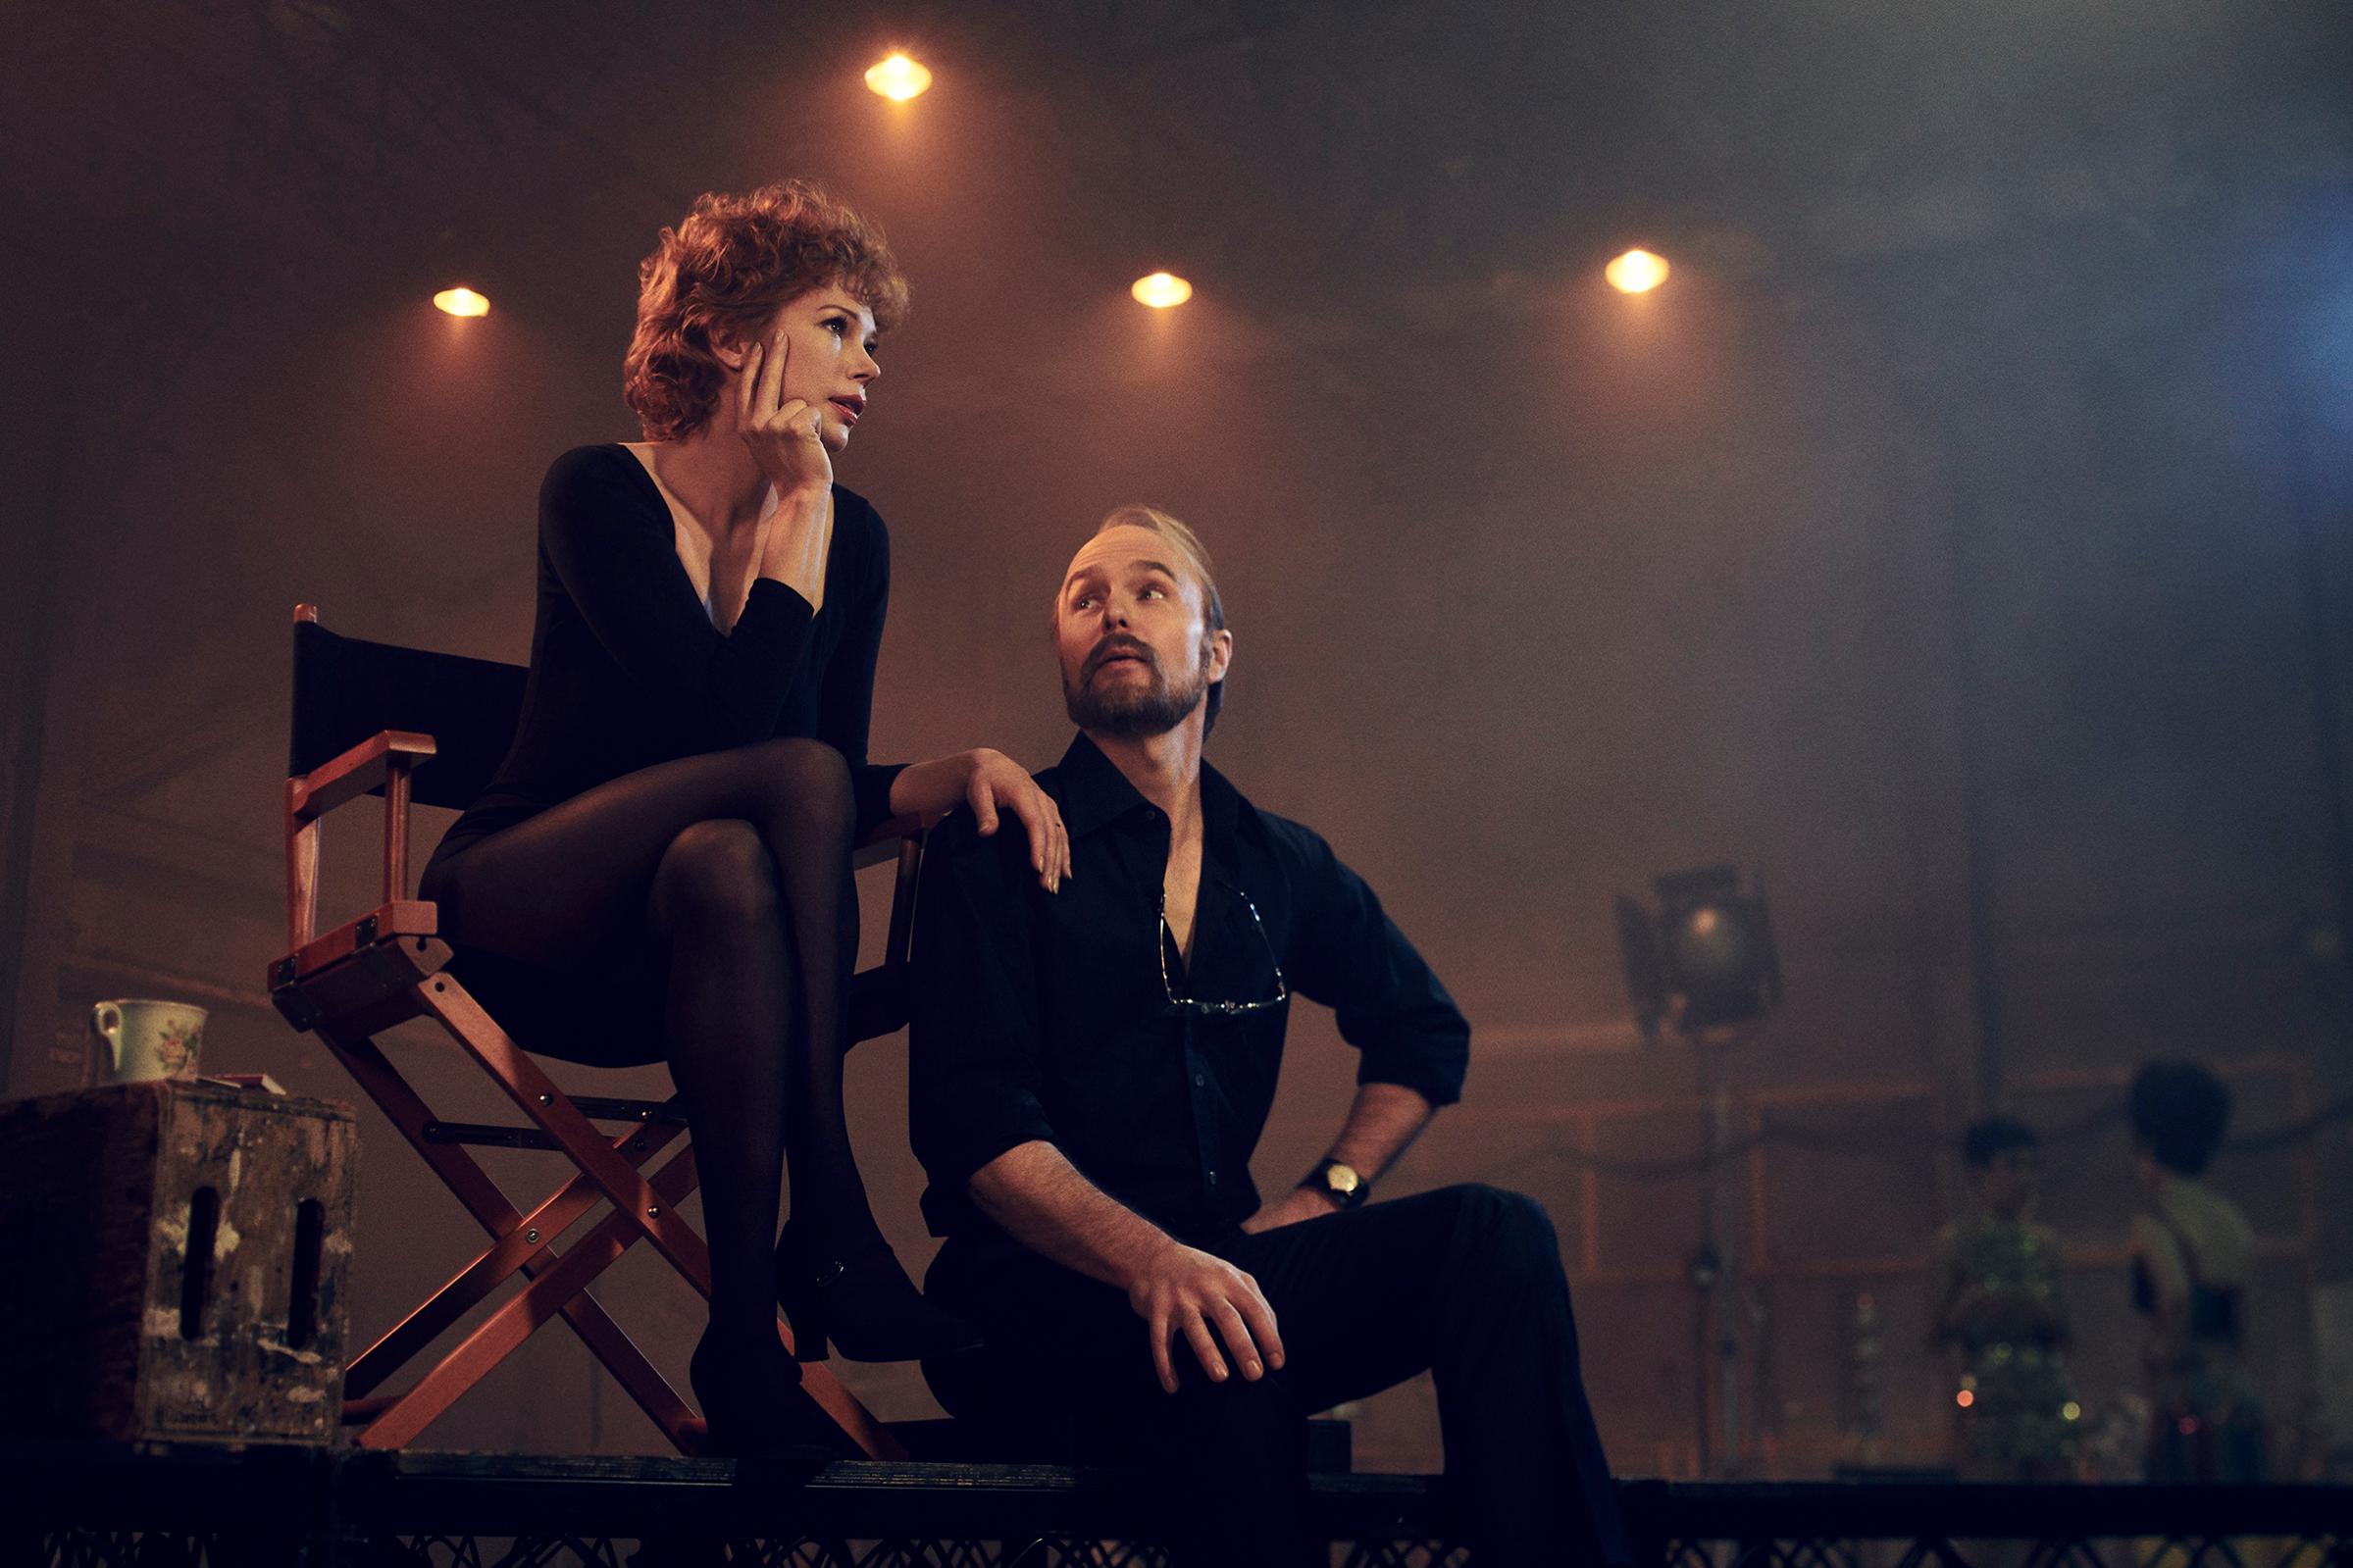 Verdon (Michelle Williams) and Fosse (Sam Rockwell) couldn’t live with each other but couldn’t work alone